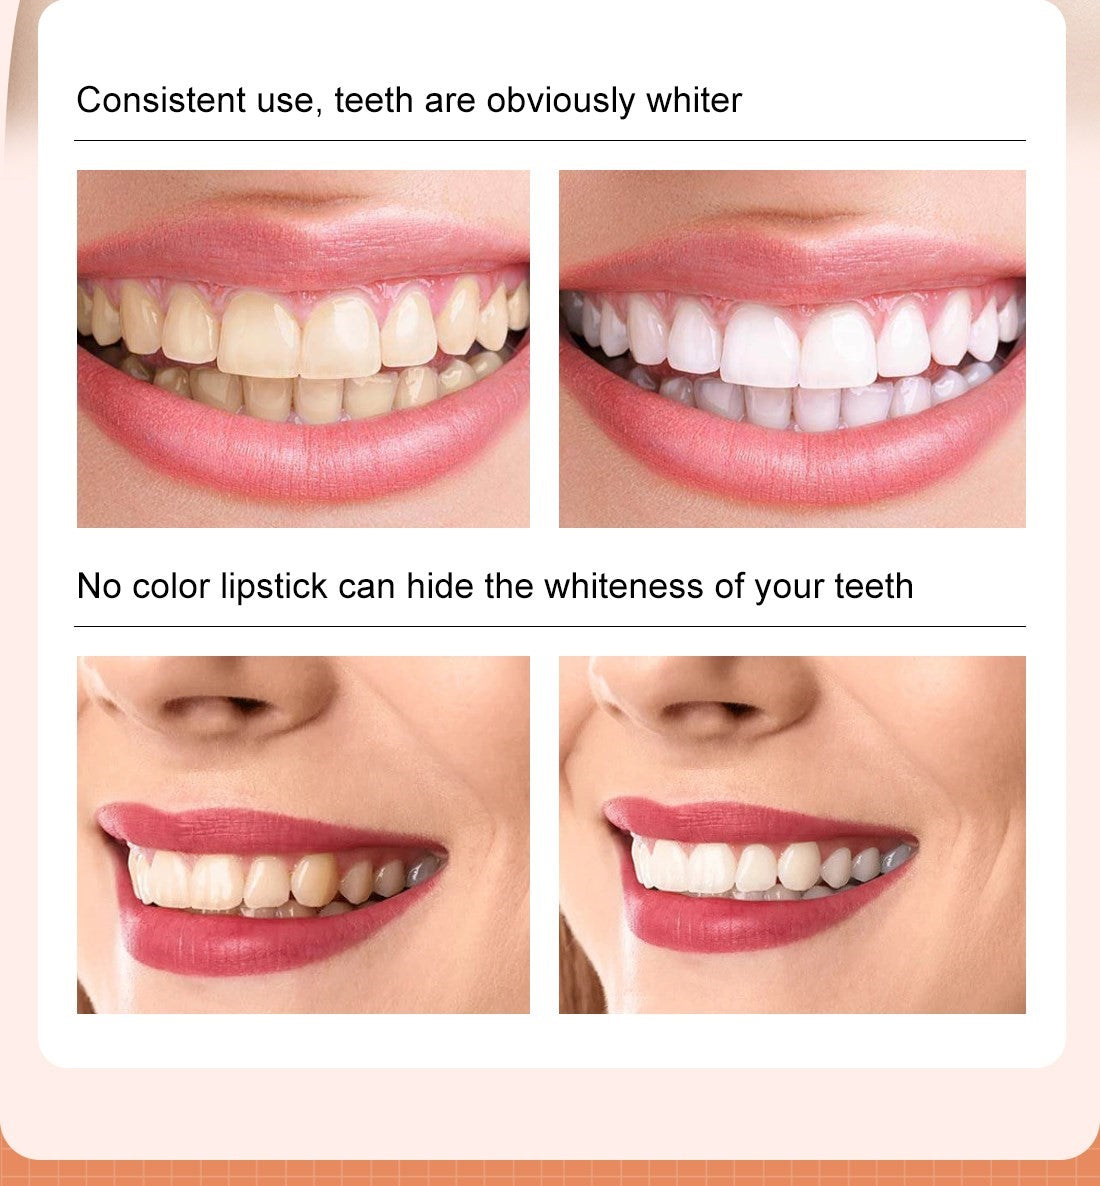 Instant Teeth Whitening Pen for a Brighter Smile - Easy and Effective!